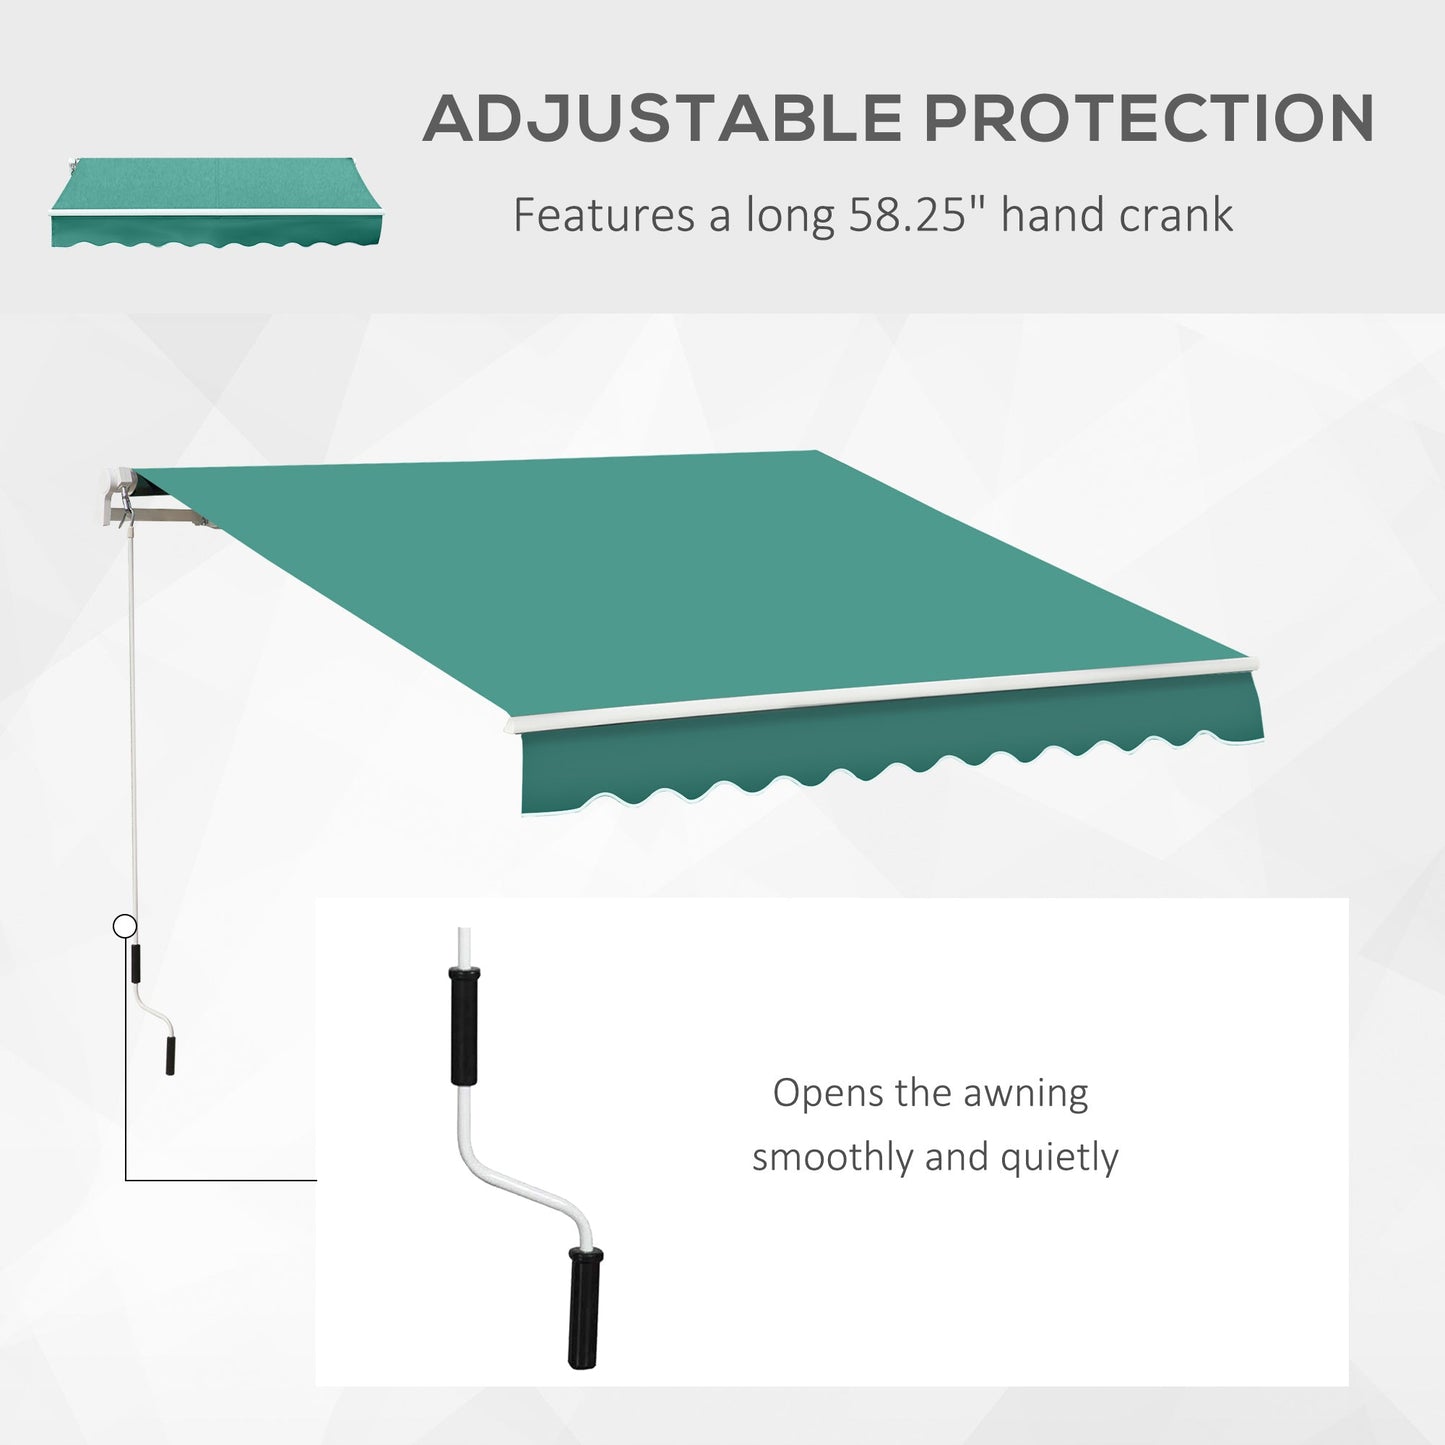 Outdoor and Garden-10' x 8' Manual Retractable Awning Sun Shade Shelter for Patio Deck Yard with UV Protection and Easy Crank Opening, Green - Outdoor Style Company